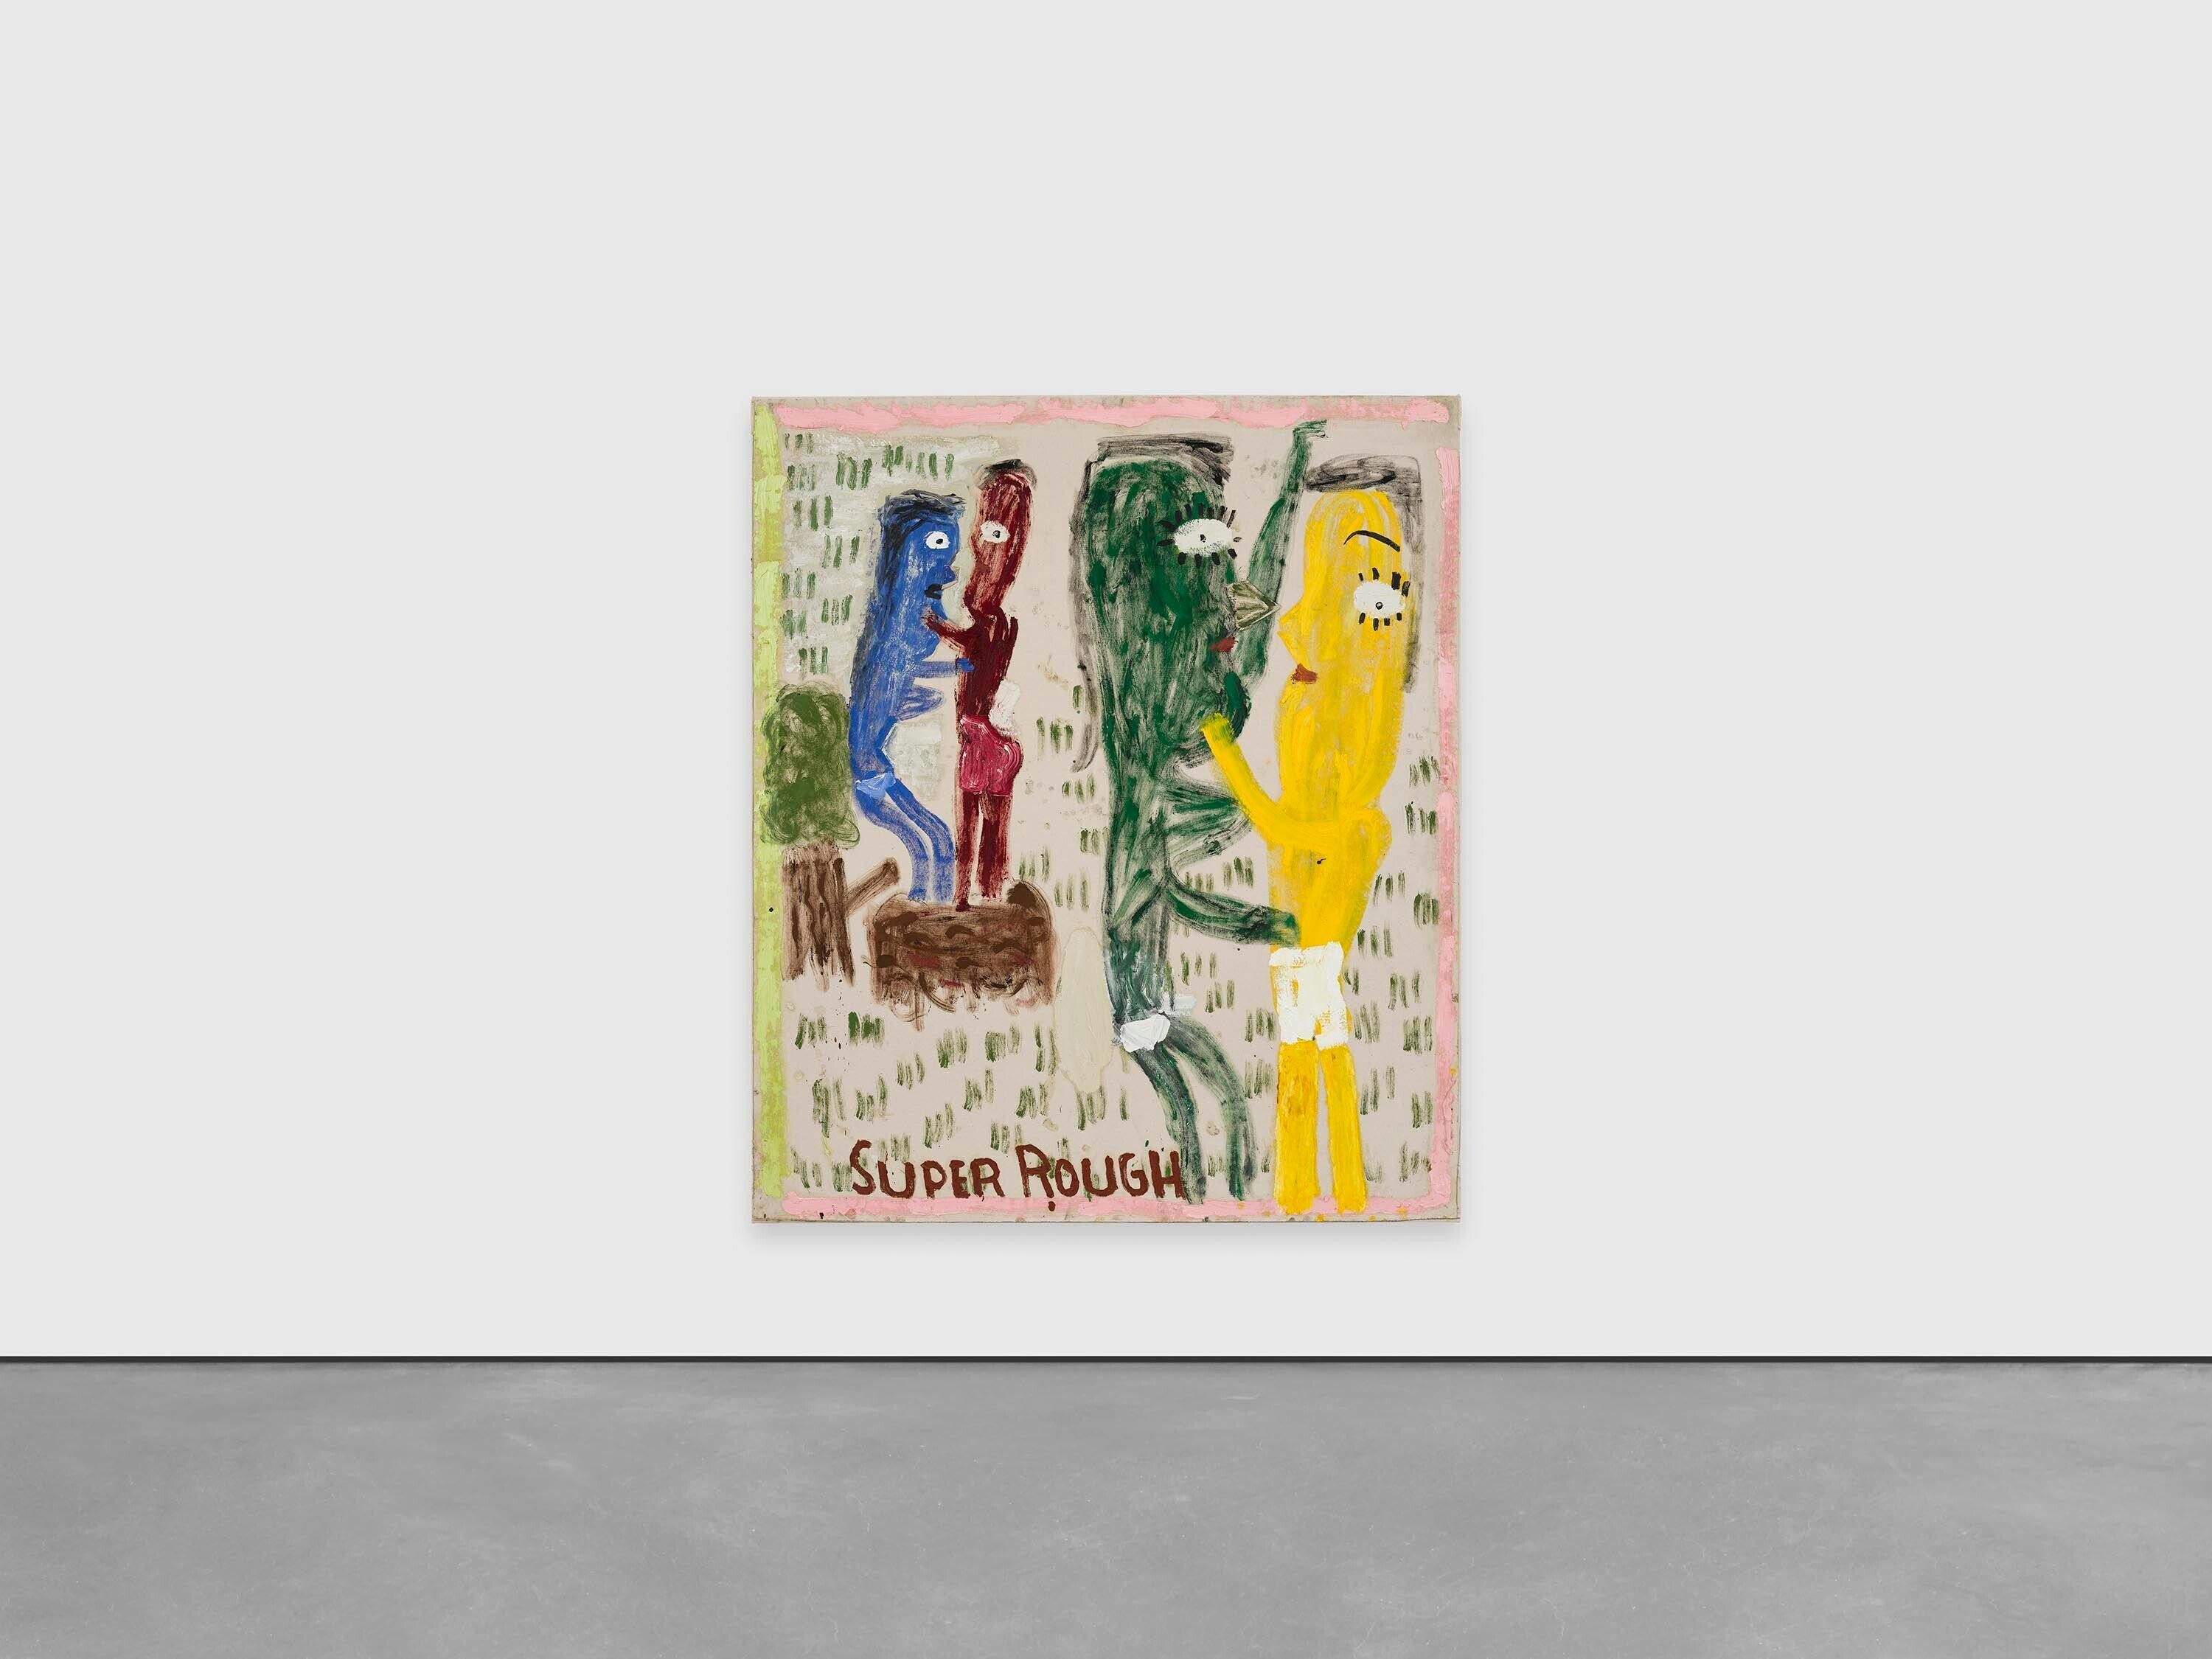 A painting by Rose Wylie, titled Super Rough 2, Nose & green grass, dated 2021.